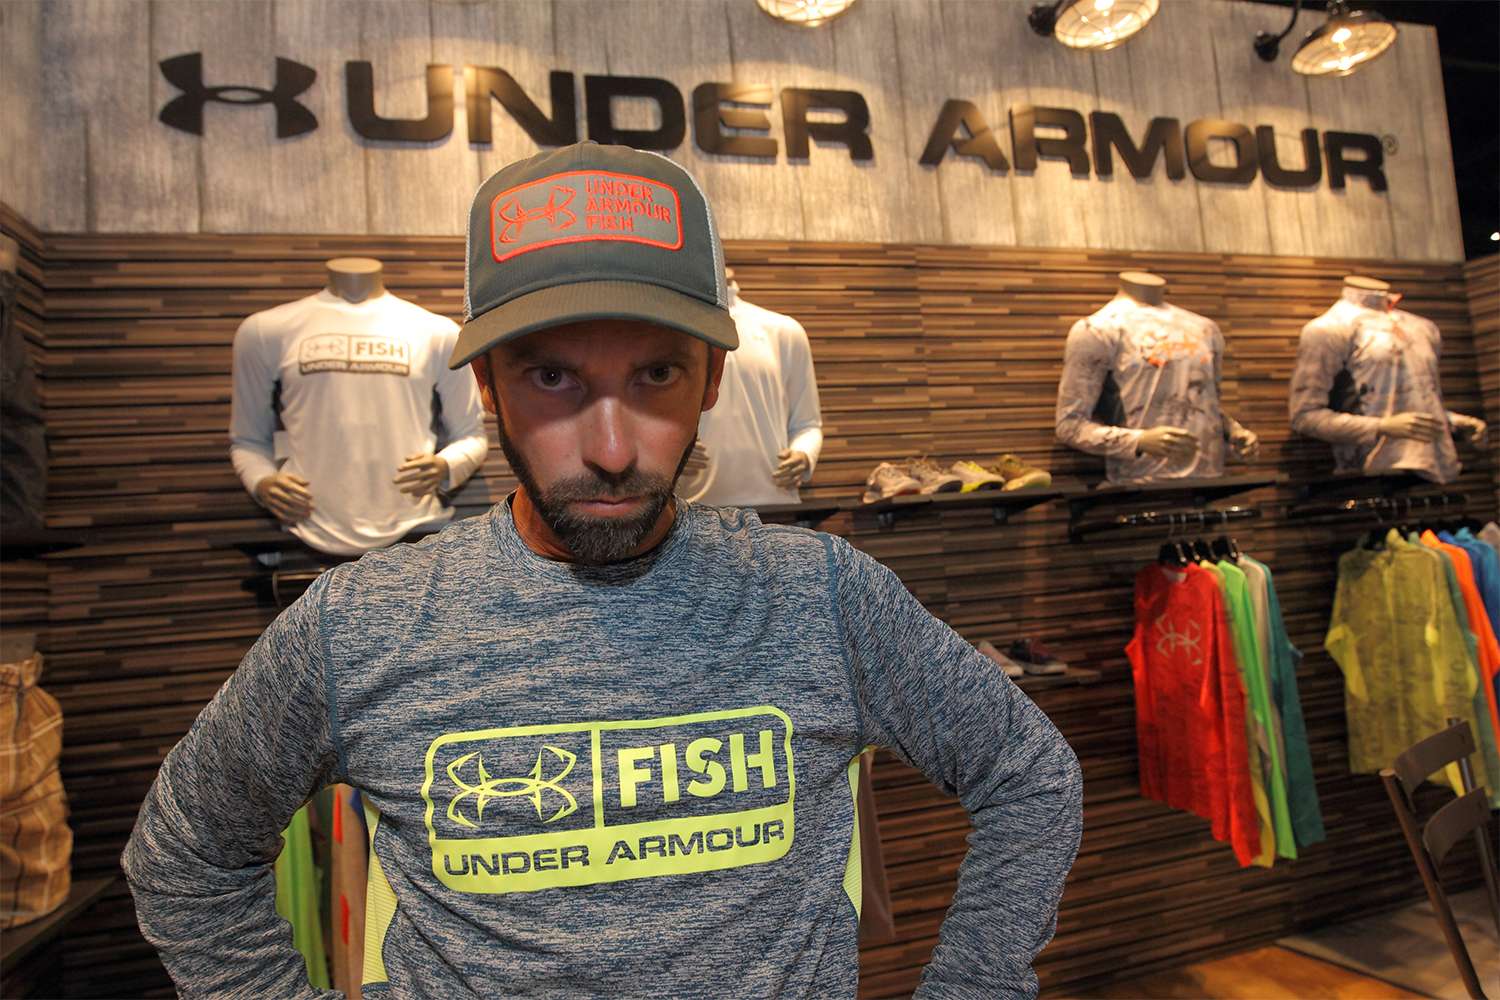 That's serious fishing apparel.